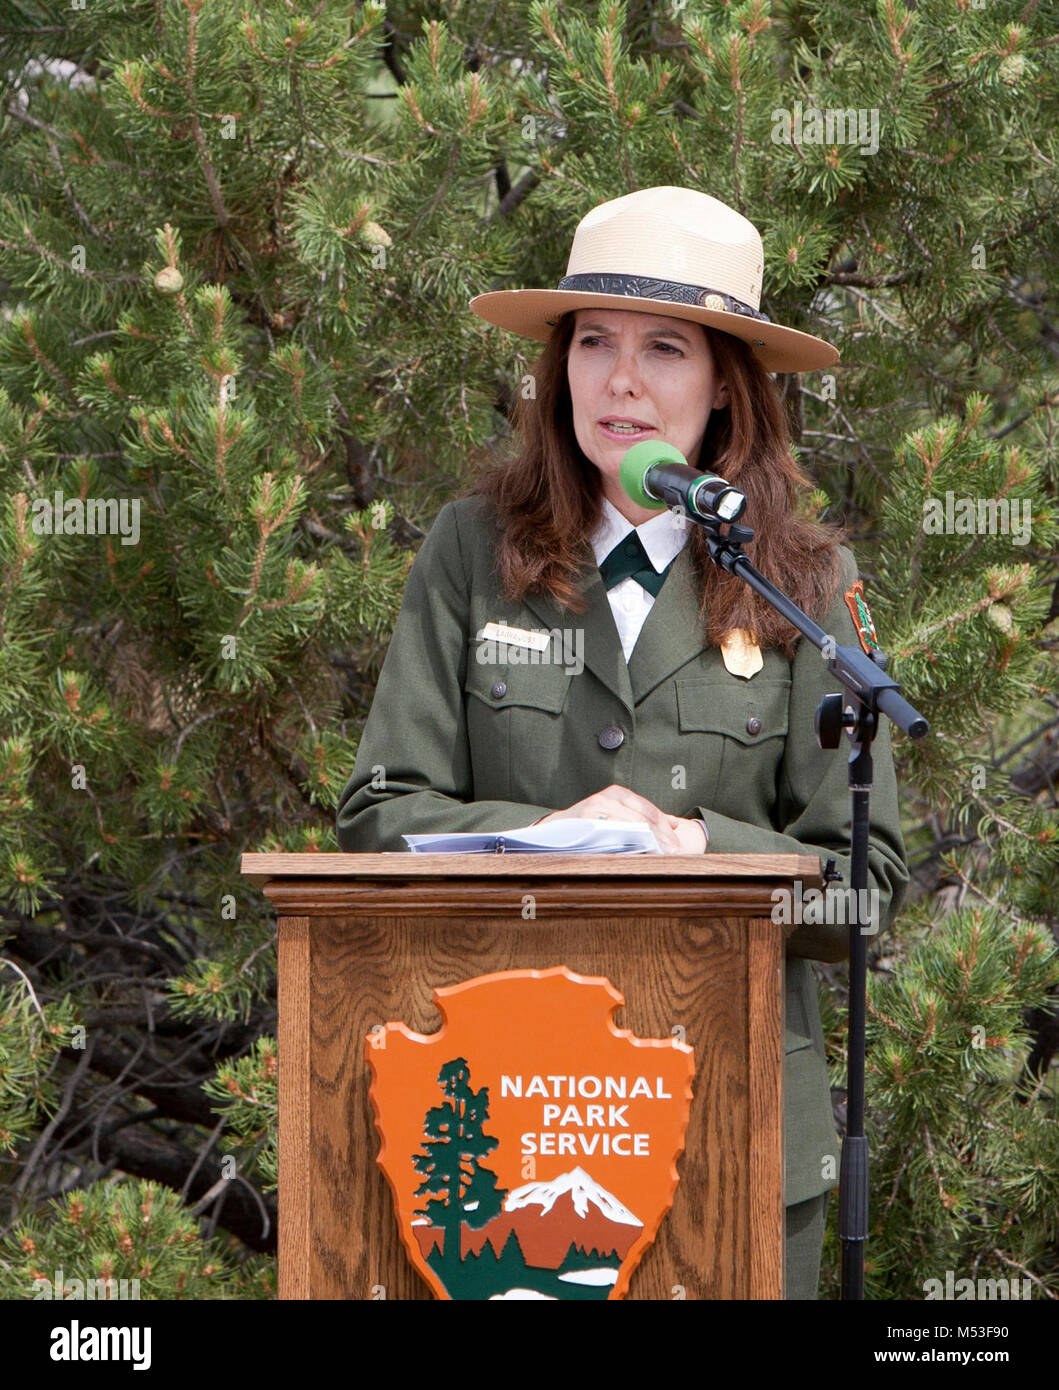 1956 Grand Canyon TWA-United Airlines Aviation Accident Site National Historic. Laura Joss, Deputy Regional Director, Intermountain Region, National Park Service addressing dedication ceremony participants. .  On Tuesday, July 8, 2014, the National Park Service (NPS) dedicated one of the nation’s newest National Historic Landmarks, the 1956 Grand Canyon TWA-United Airlines Aviation Accident Site in Grand Canyon National Park. This site commemorates a horrific airline collision over the Grand Canyon in 1956.   The public dedication ceremony of the National Historic Landmark designation took pla Stock Photo